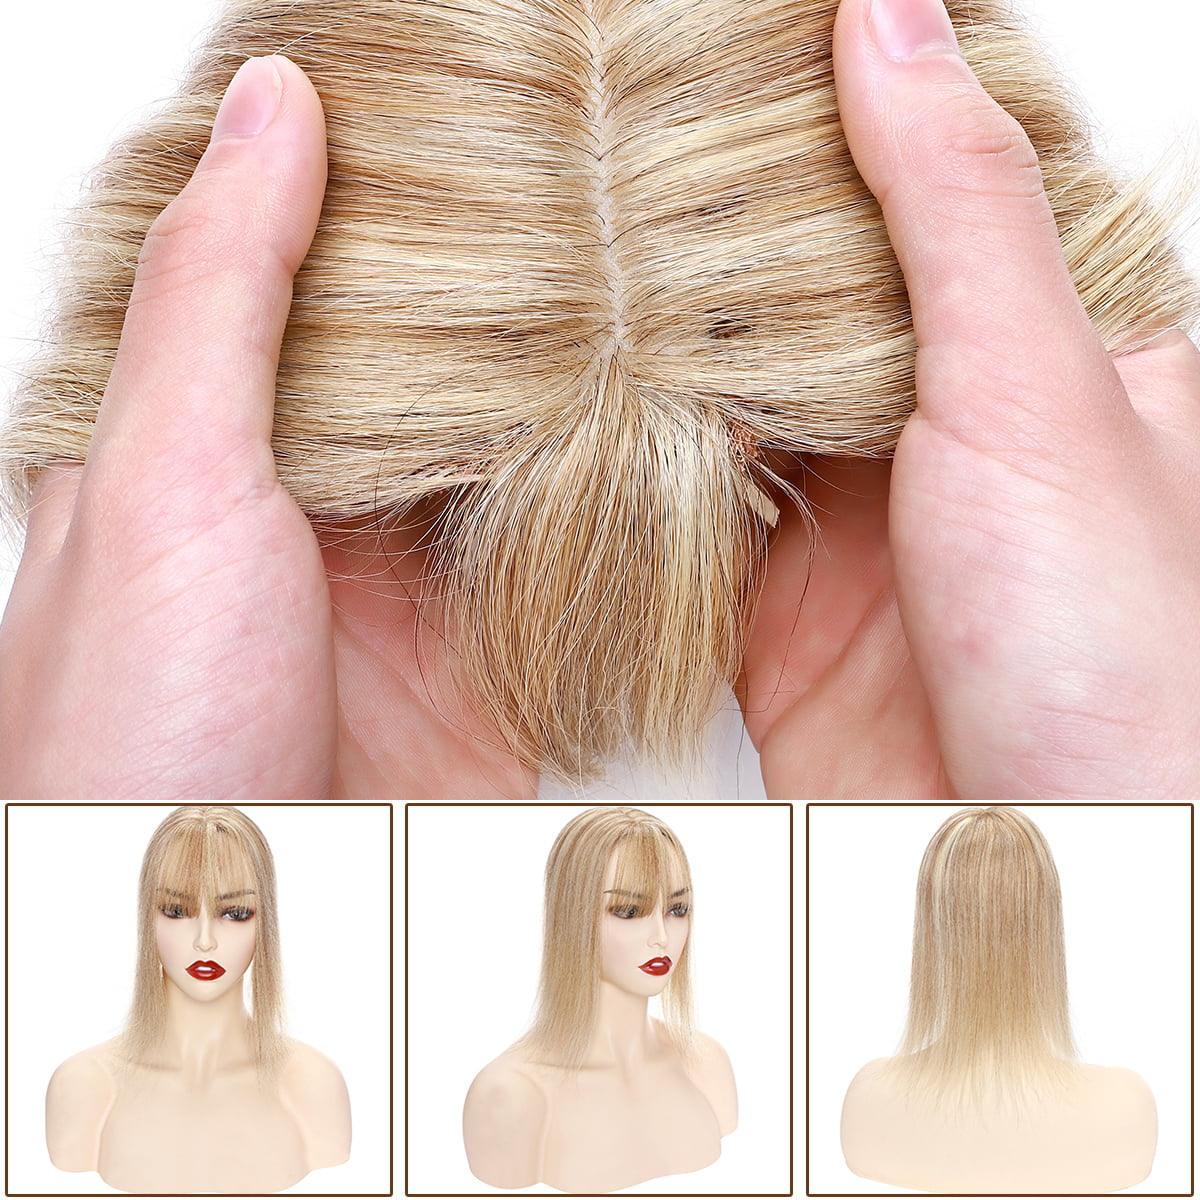 Simnient U/T Shape 30pcs/lot Clip in Hair Extension Wig Clips for Human Hair Bangs Snap Hair Clips for